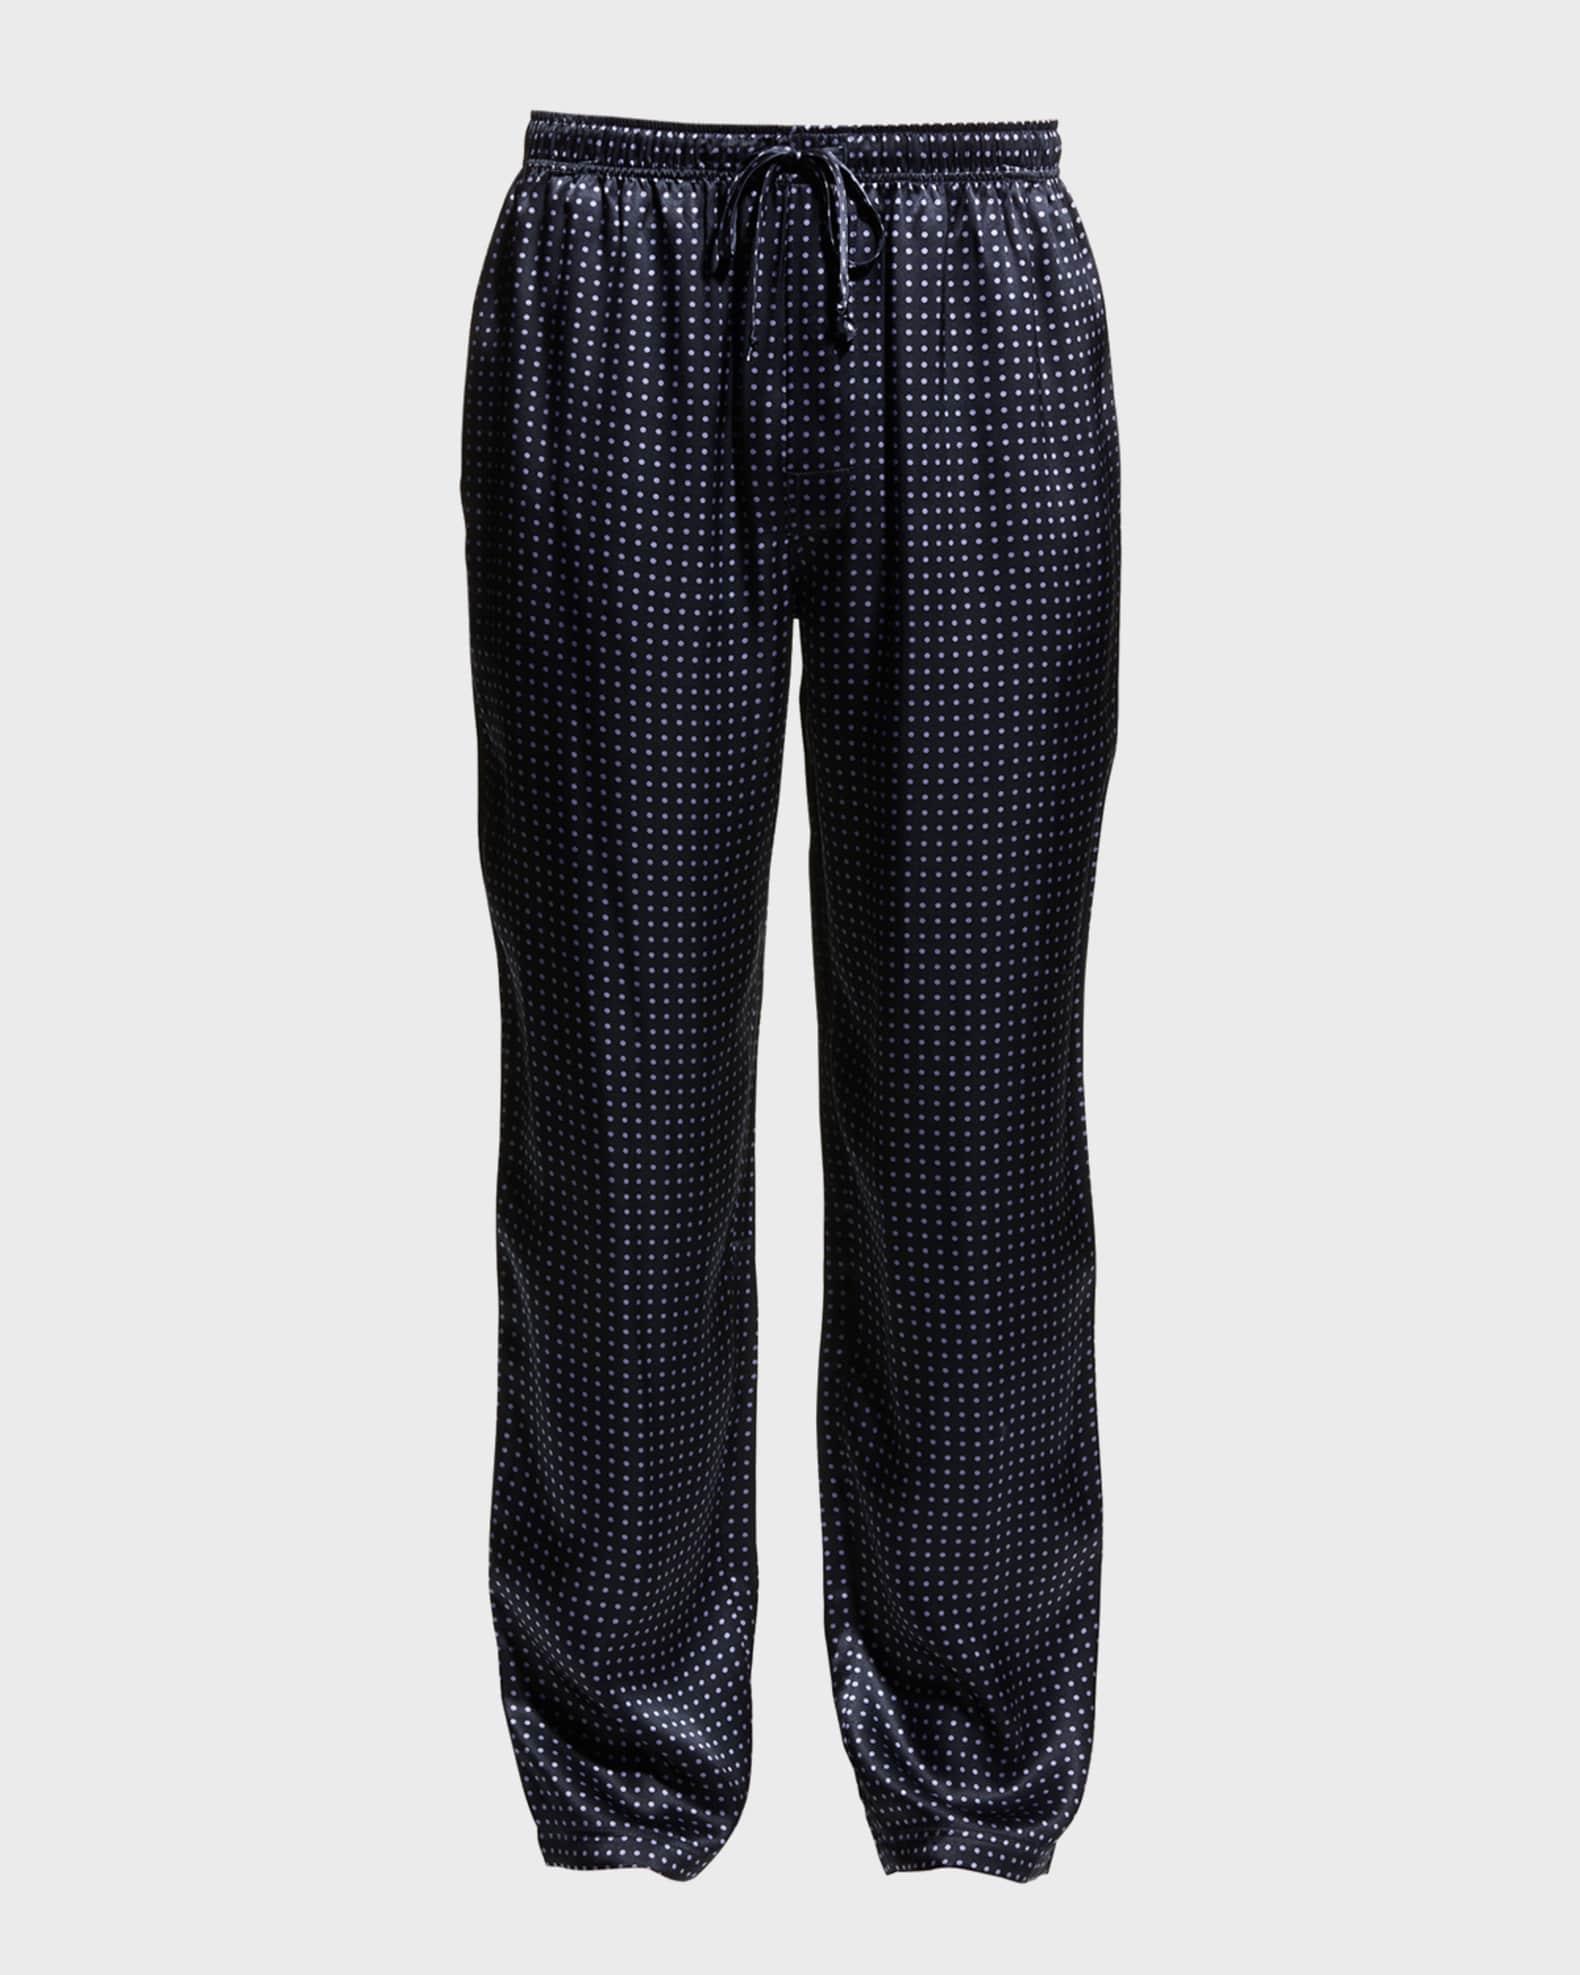 Citified Textured Flannel Lounge Pant – Majestic International